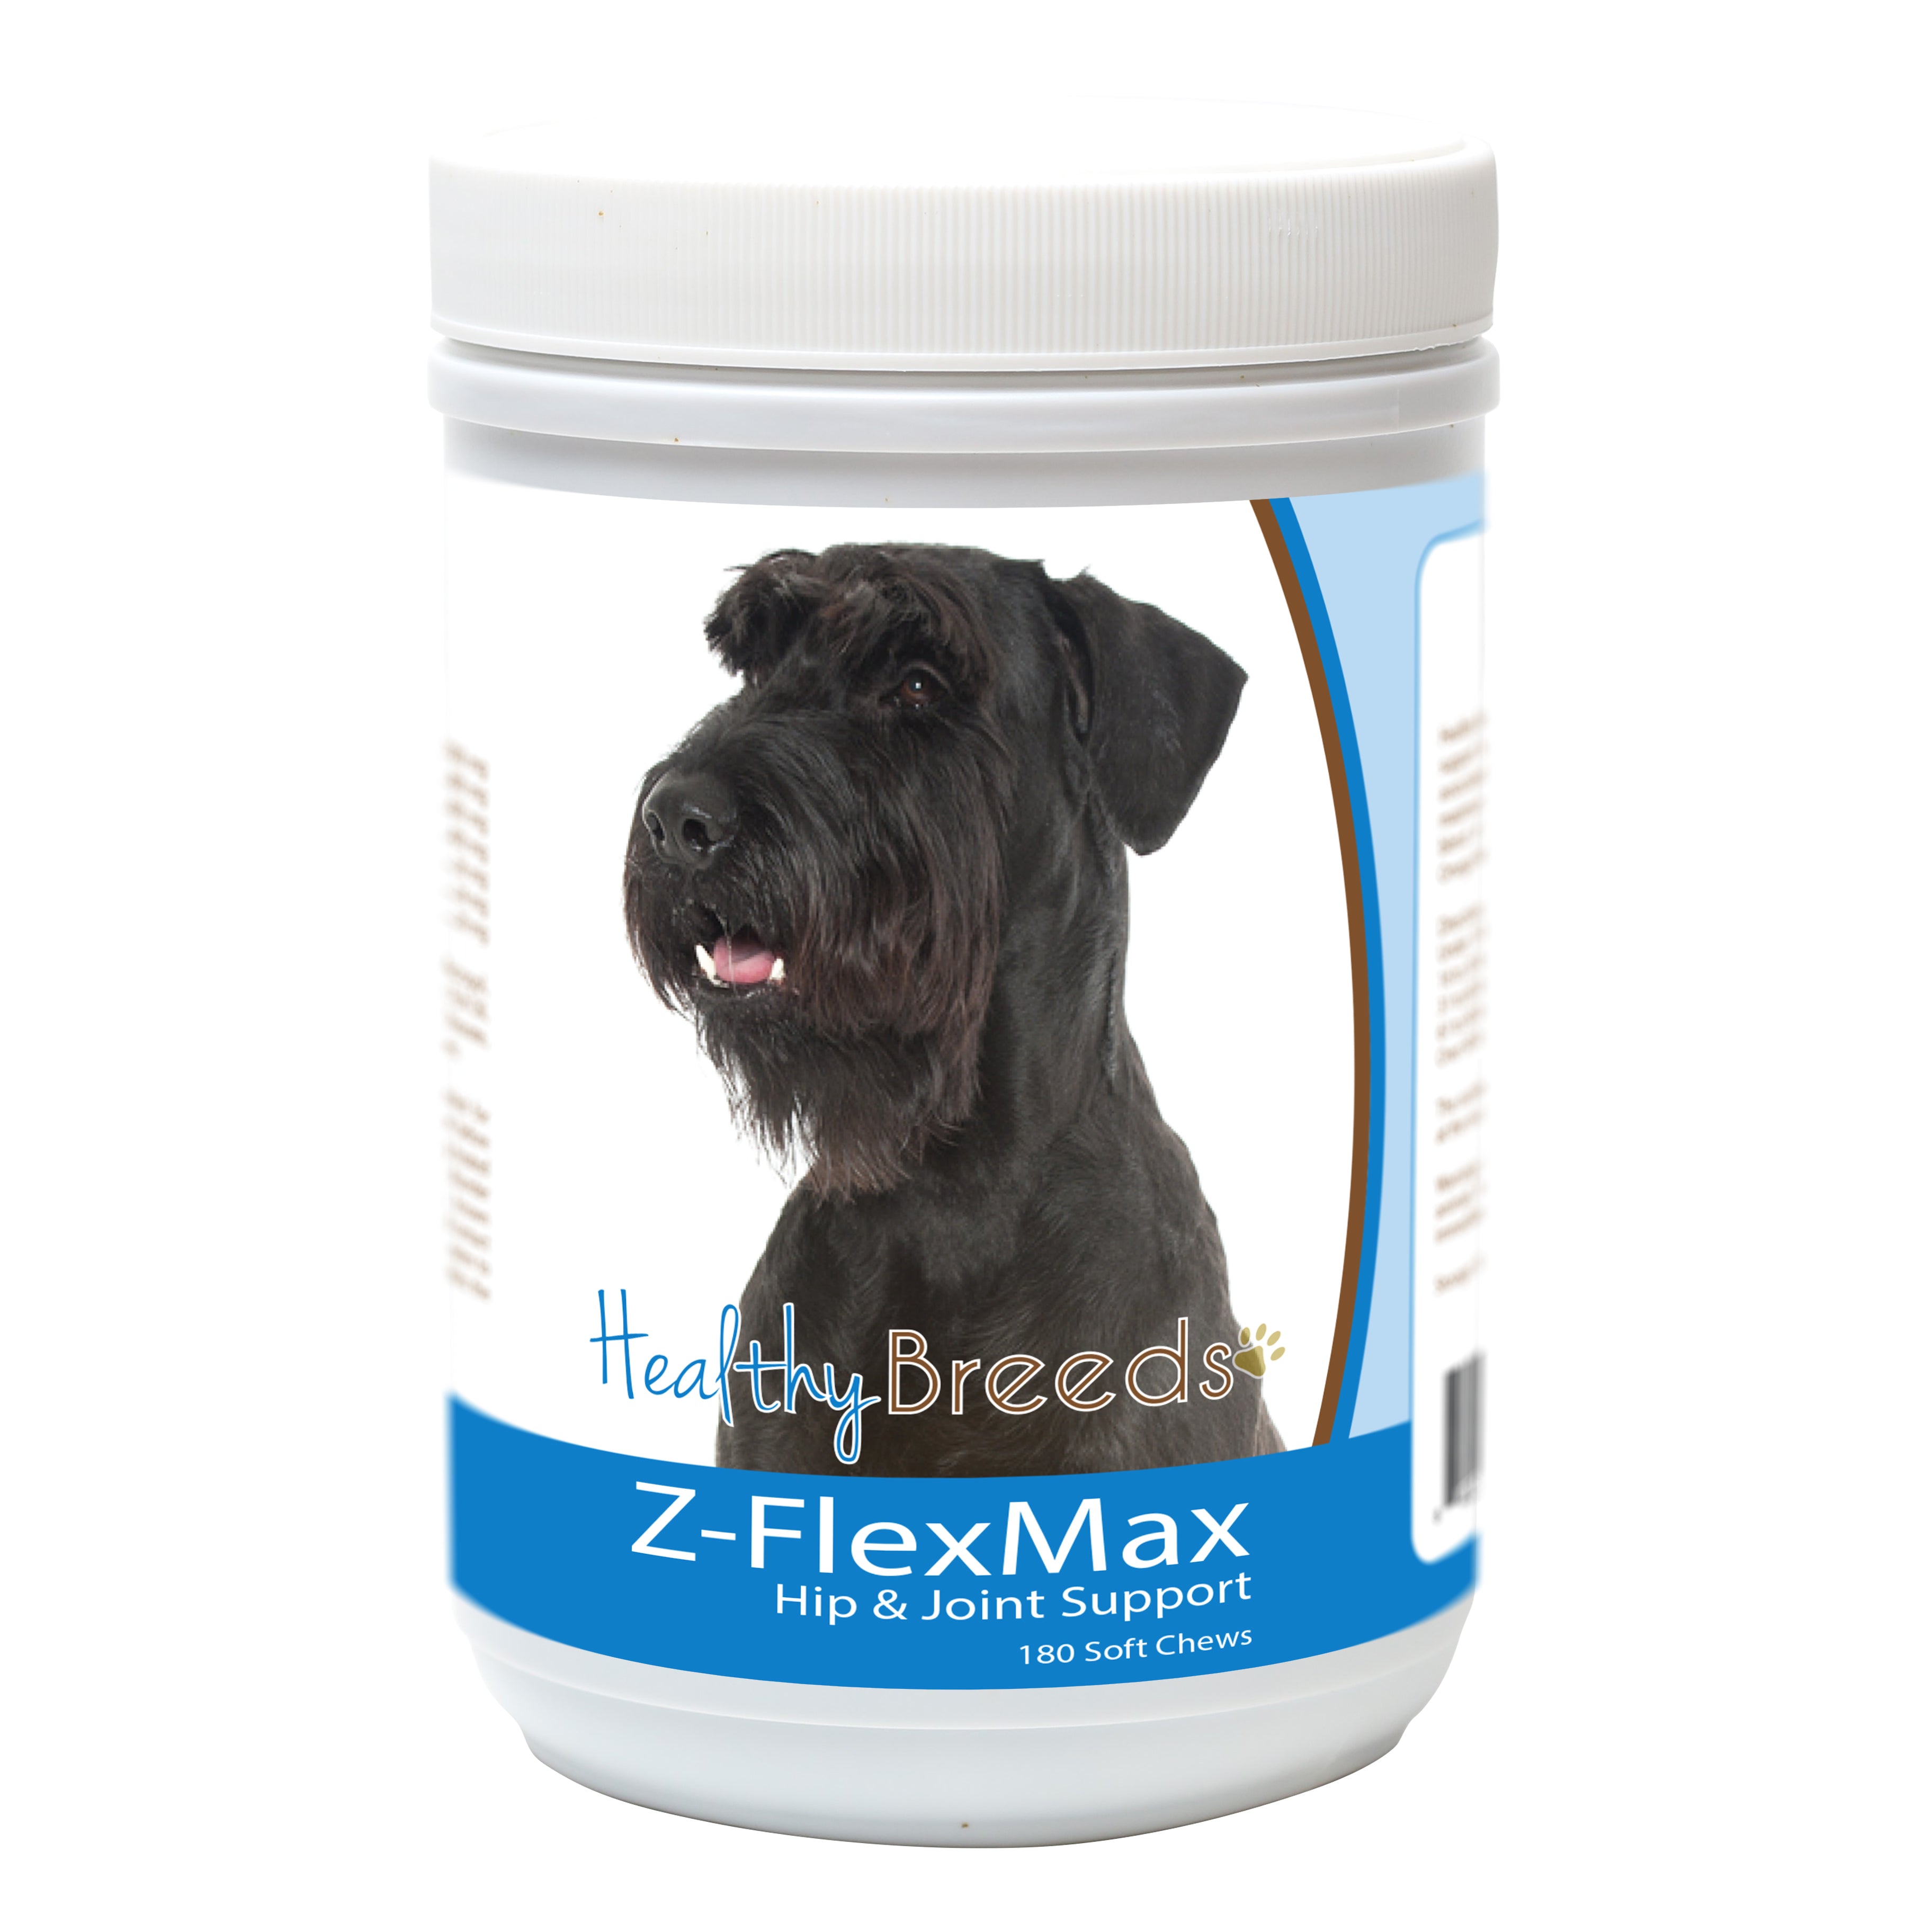 Giant Schnauzer Z-Flex Max Dog Hip and Joint Support 180 Count